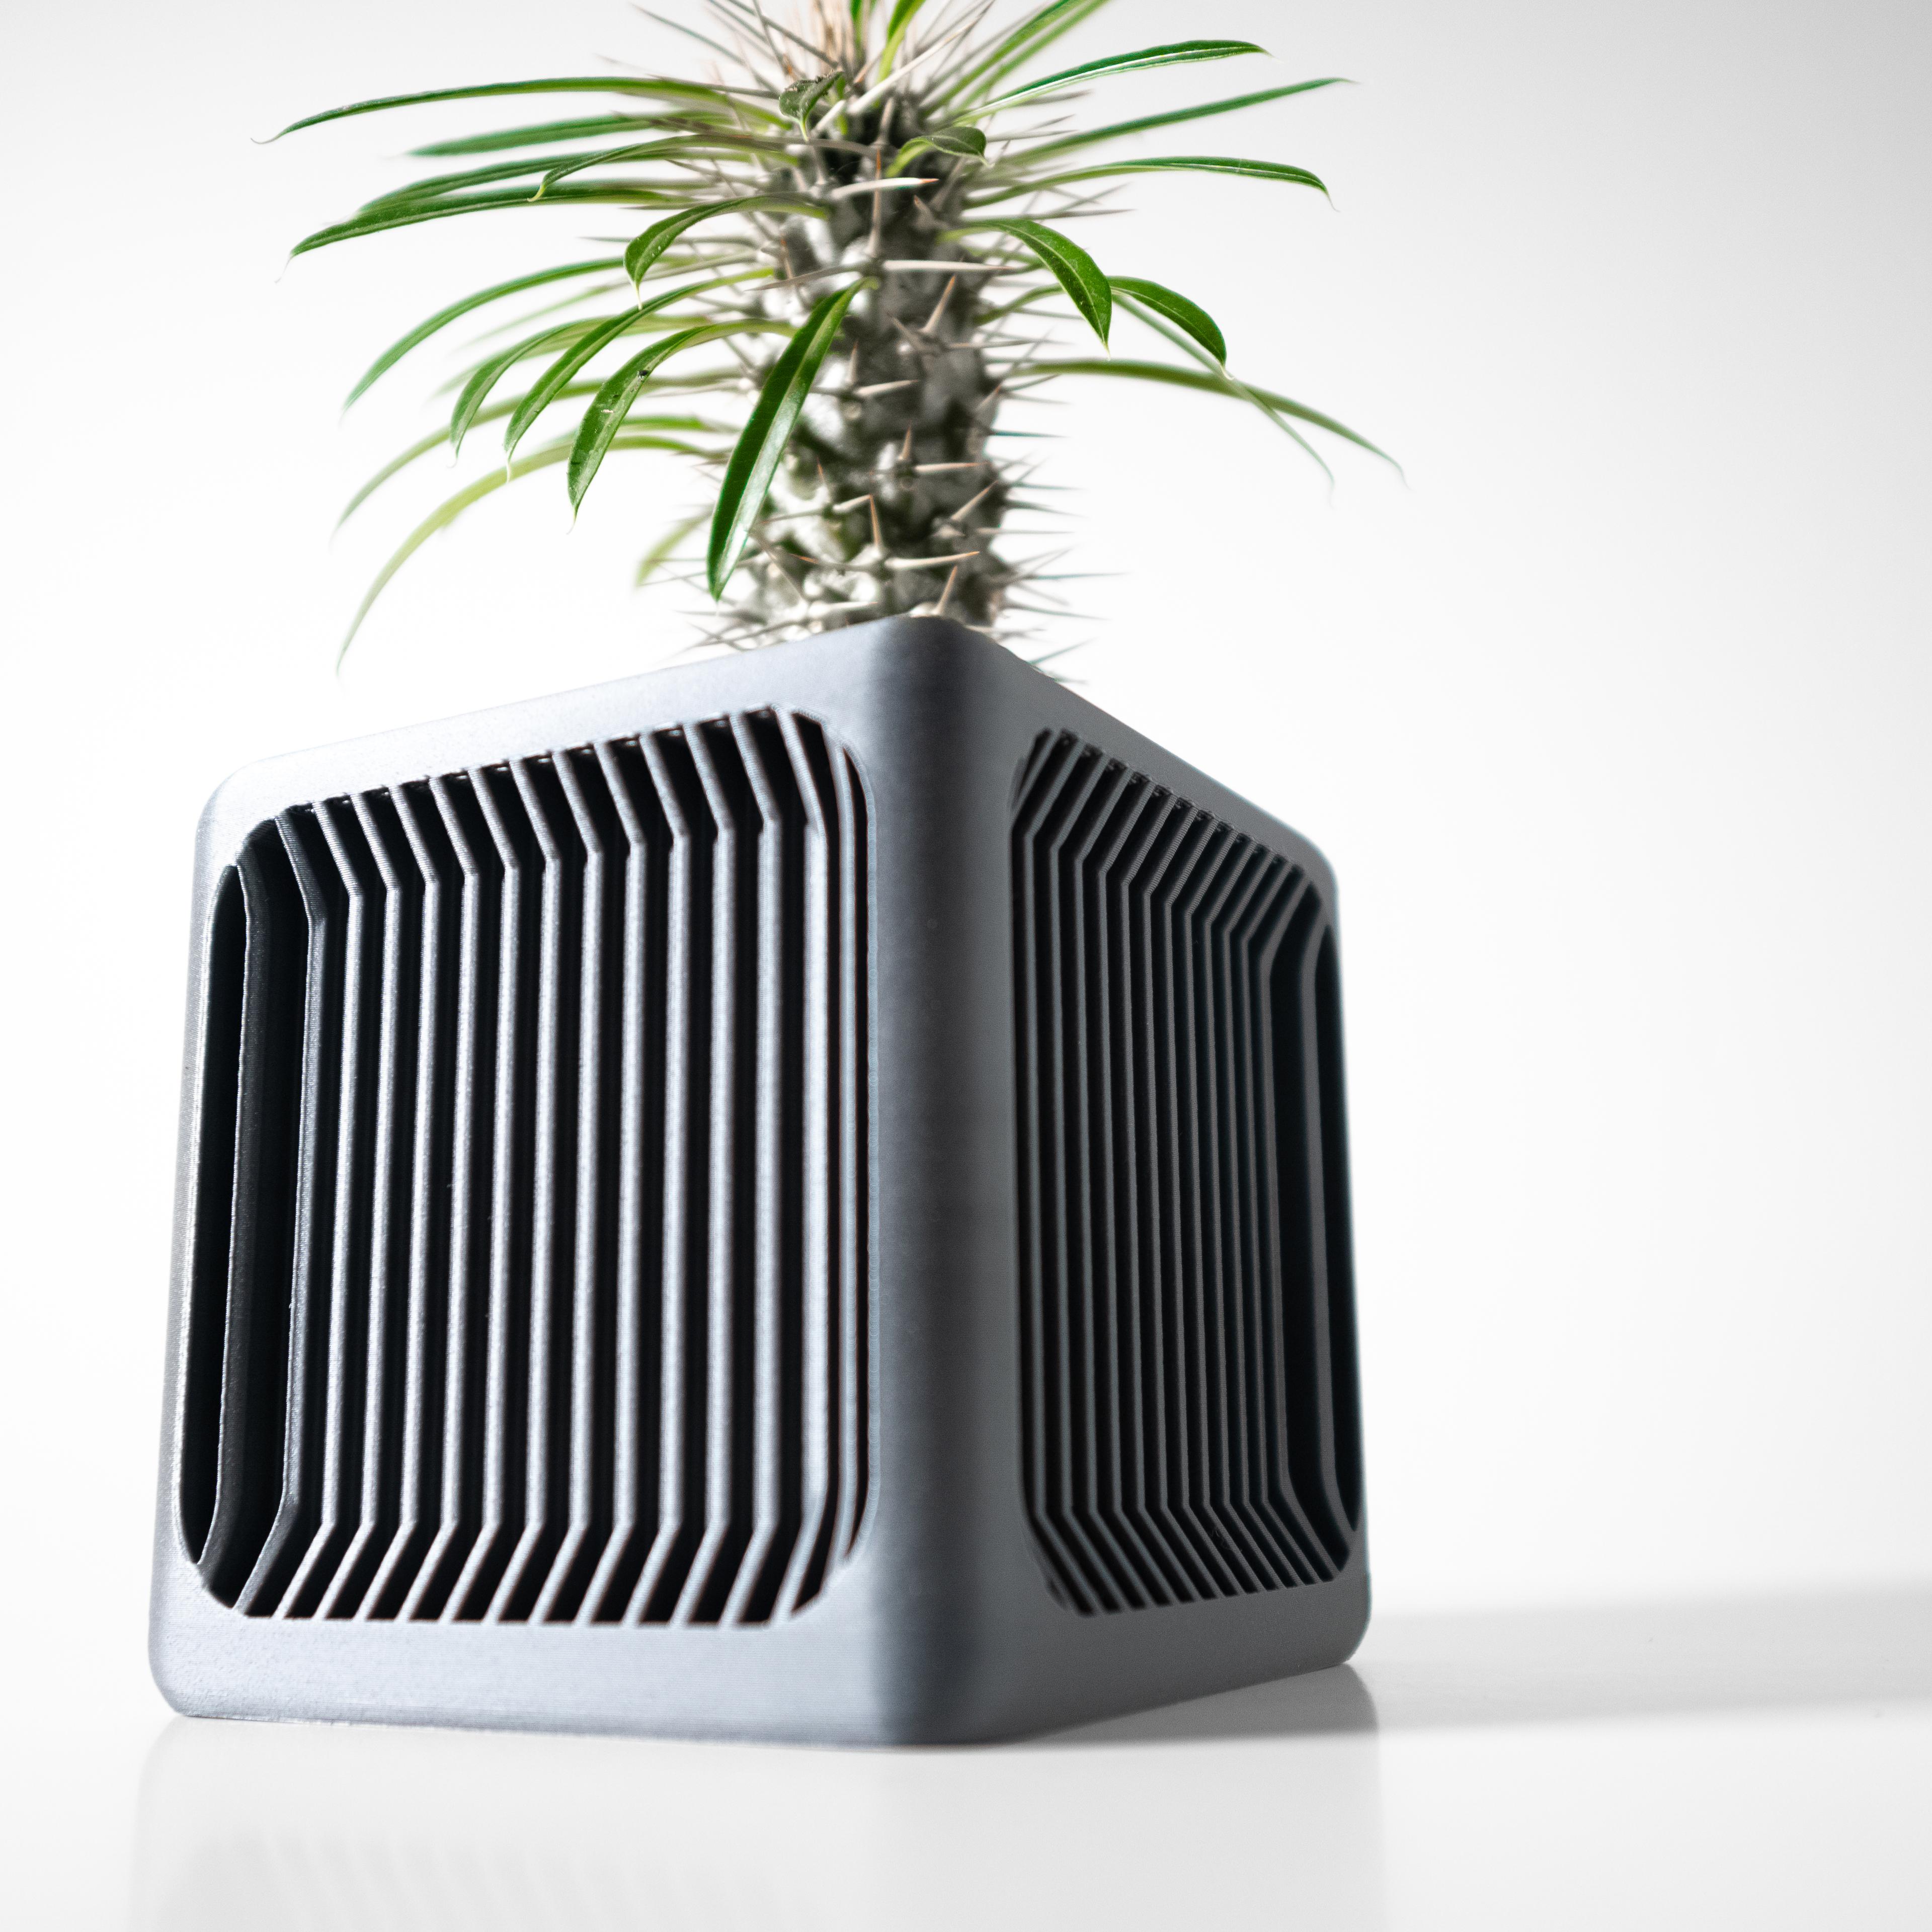 The Rovo Square Planter Pot with Drainage Tray by Terra de Verdant 3d model